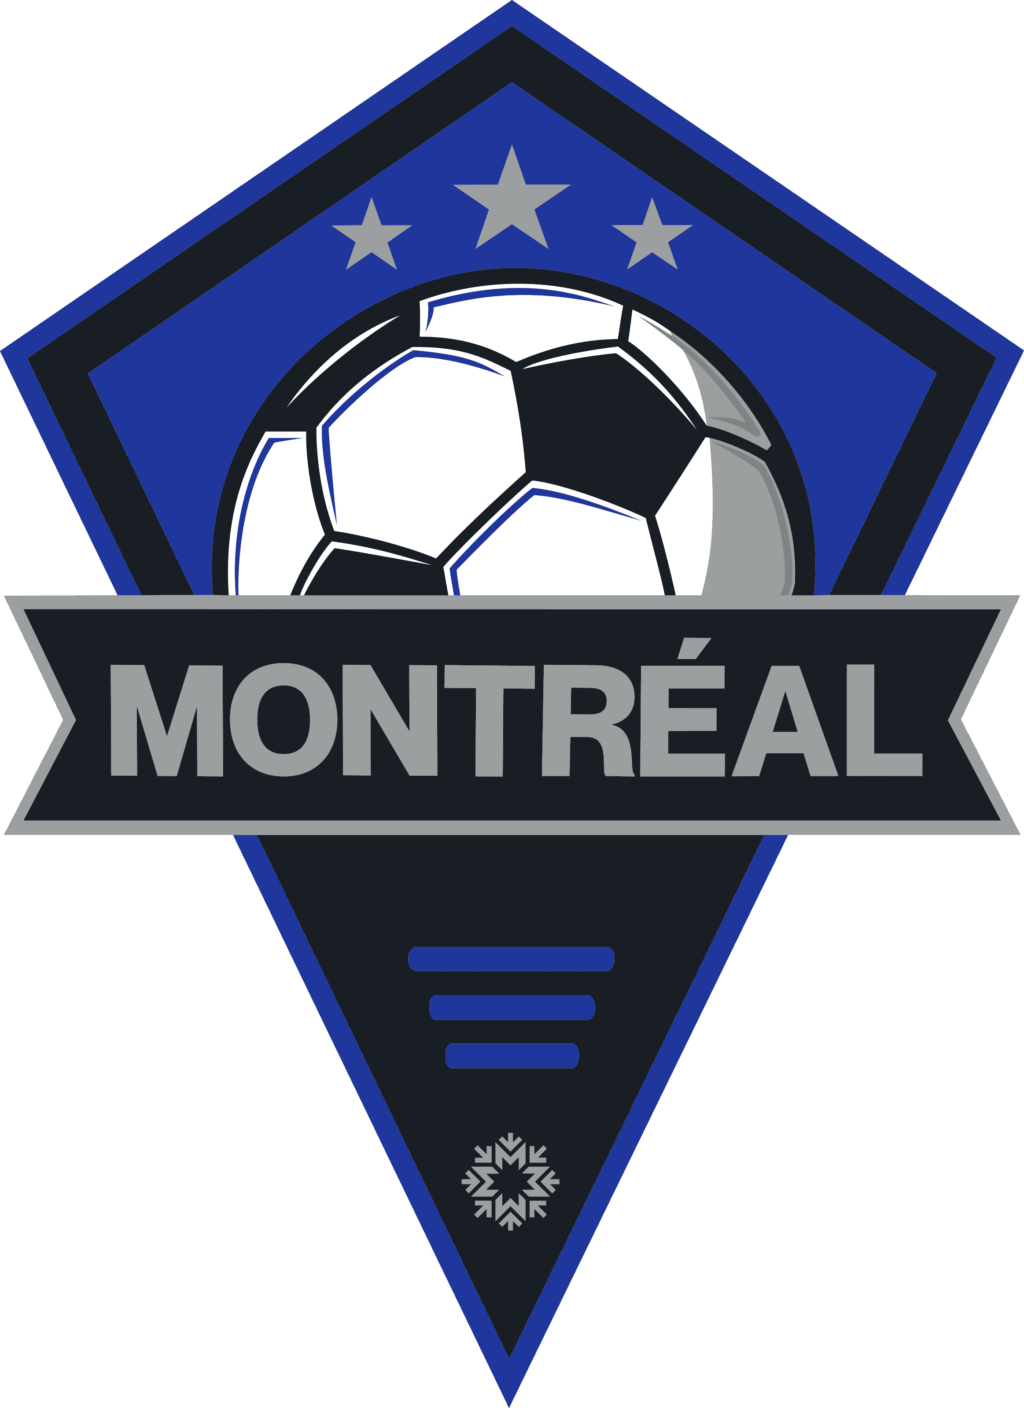 club de foot montreal 15 MLS Logo Club de Foot Montreal, Club de Foot Montreal SVG, Vector Club de Foot Montreal, Clipart Club de Foot Montreal, Football Kit Club de Foot Montreal, SVG, DXF, PNG, Soccer Logo Vector Club de Foot Montreal, EPS download MLS-files for silhouette, files for clipping.